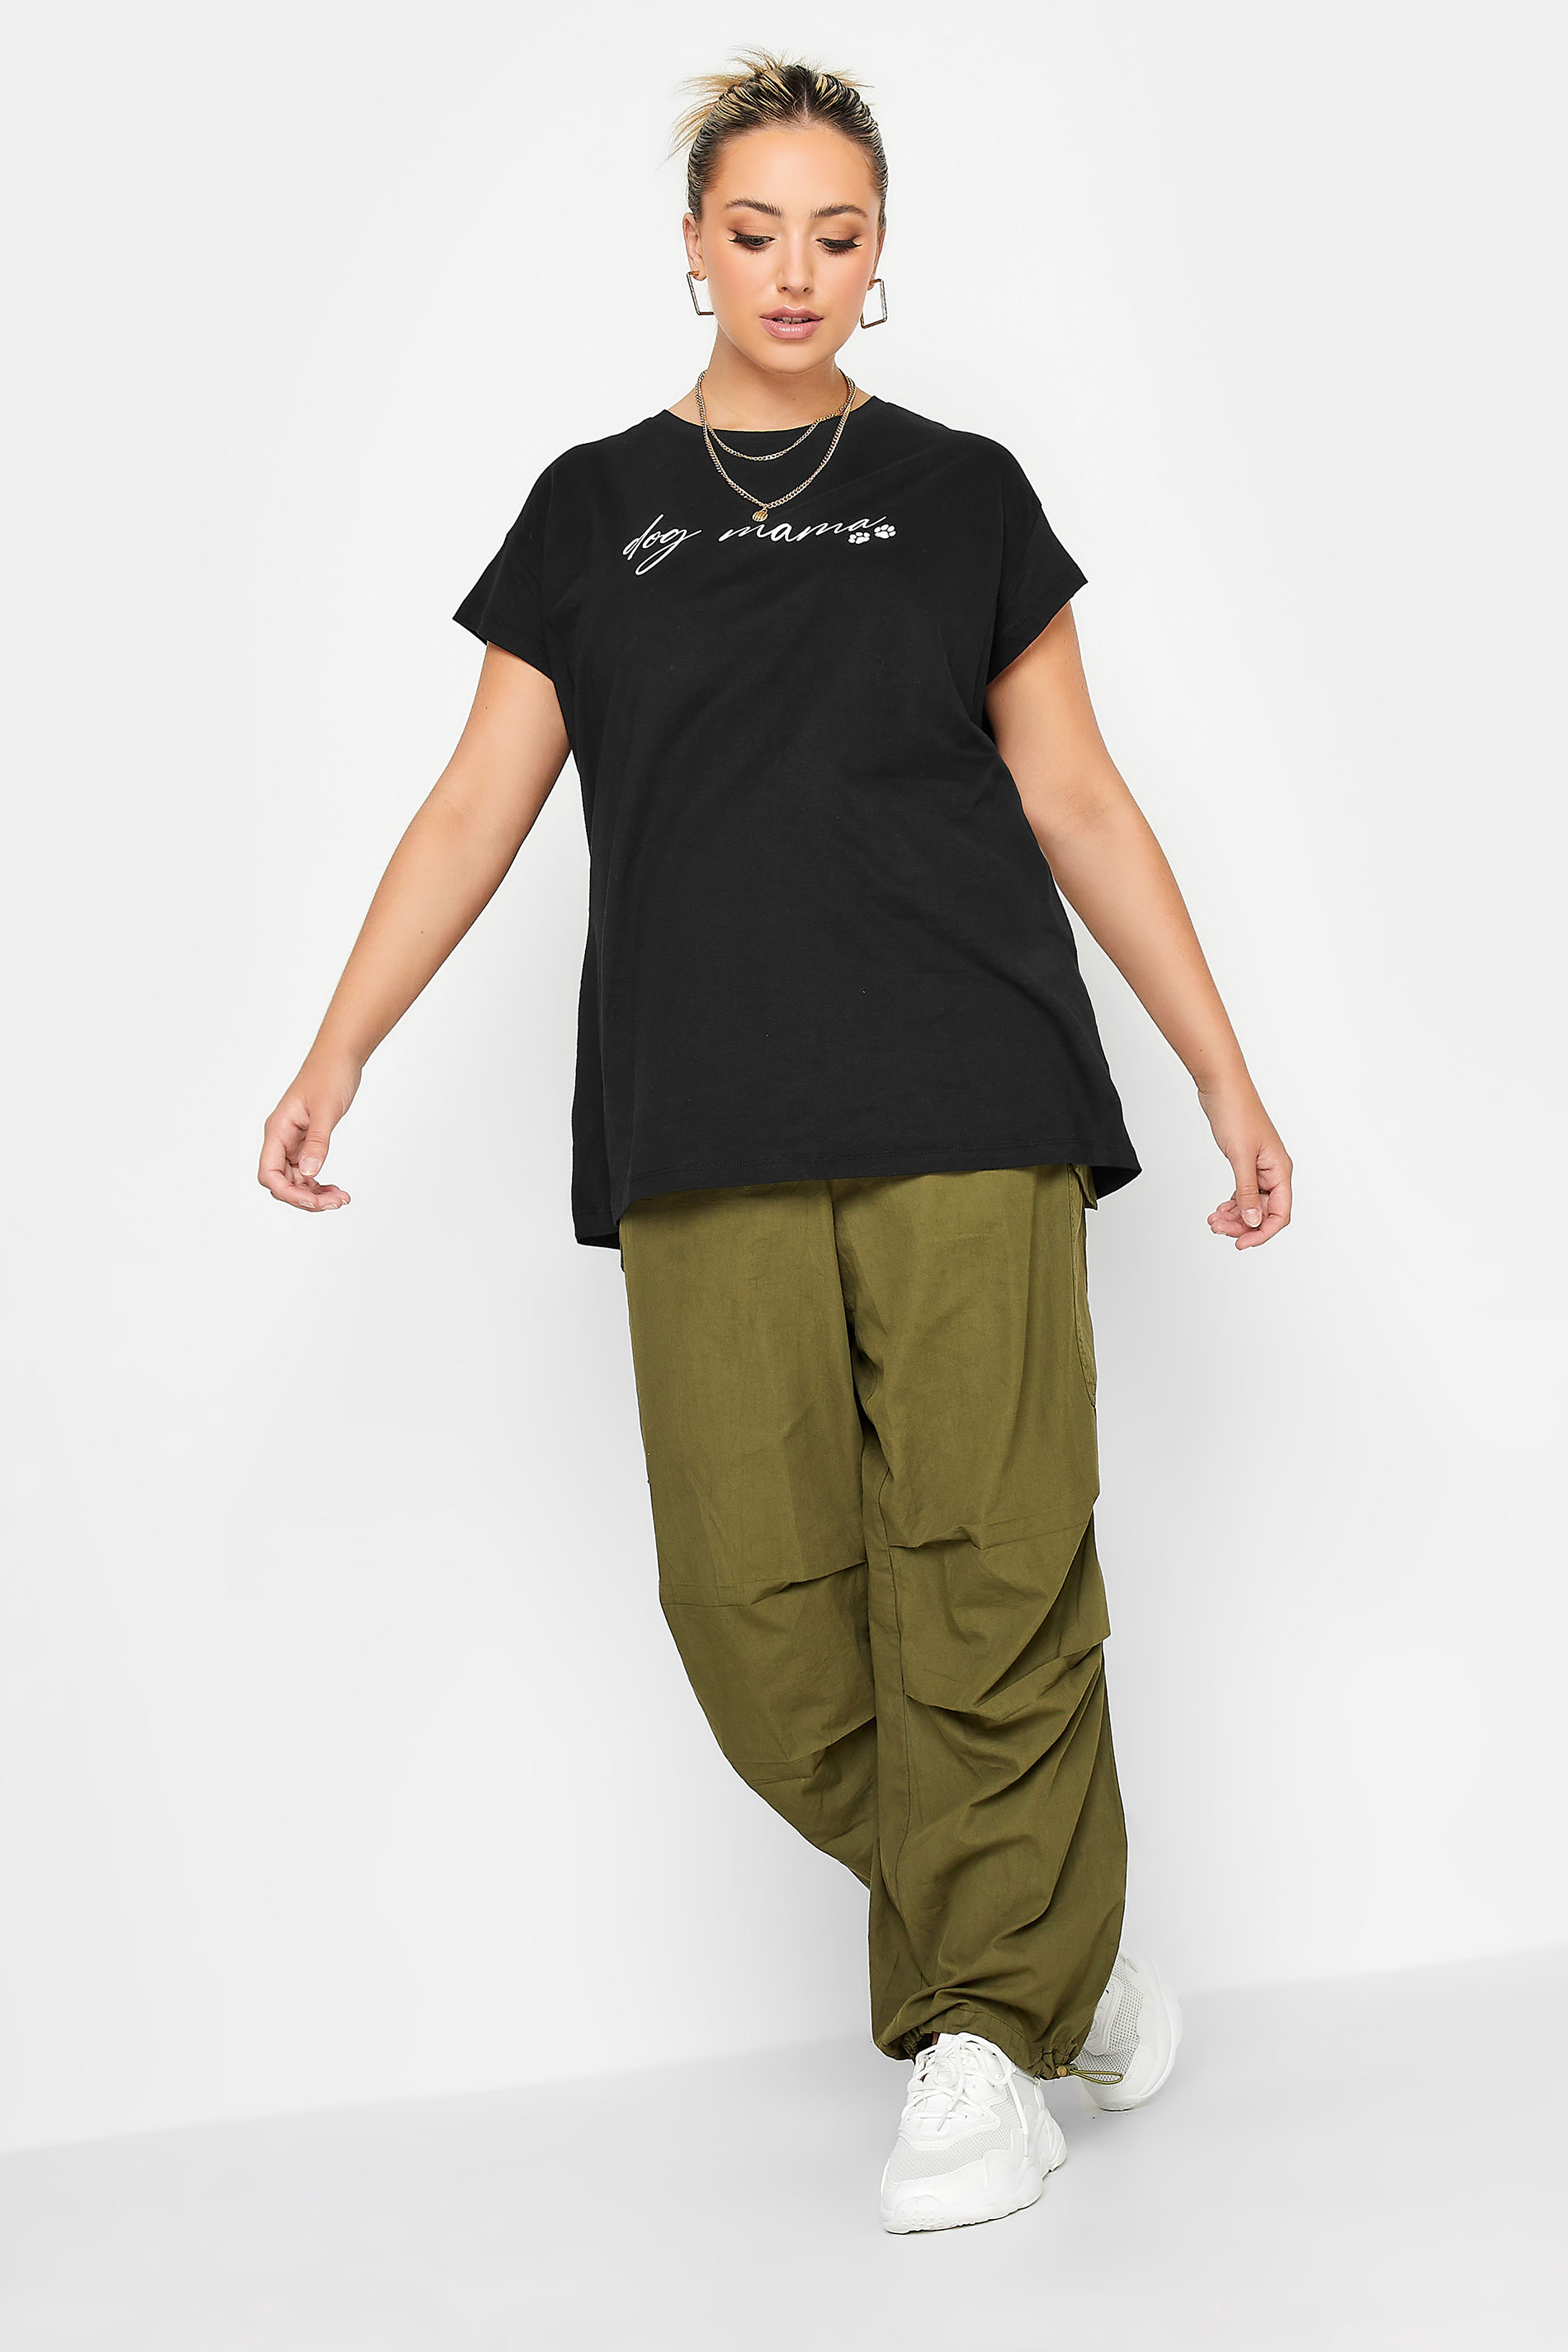 LIMITED COLLECTION Plus Size Black 'Dog Mama' Slogan T-Shirt | Yours Clothing 2